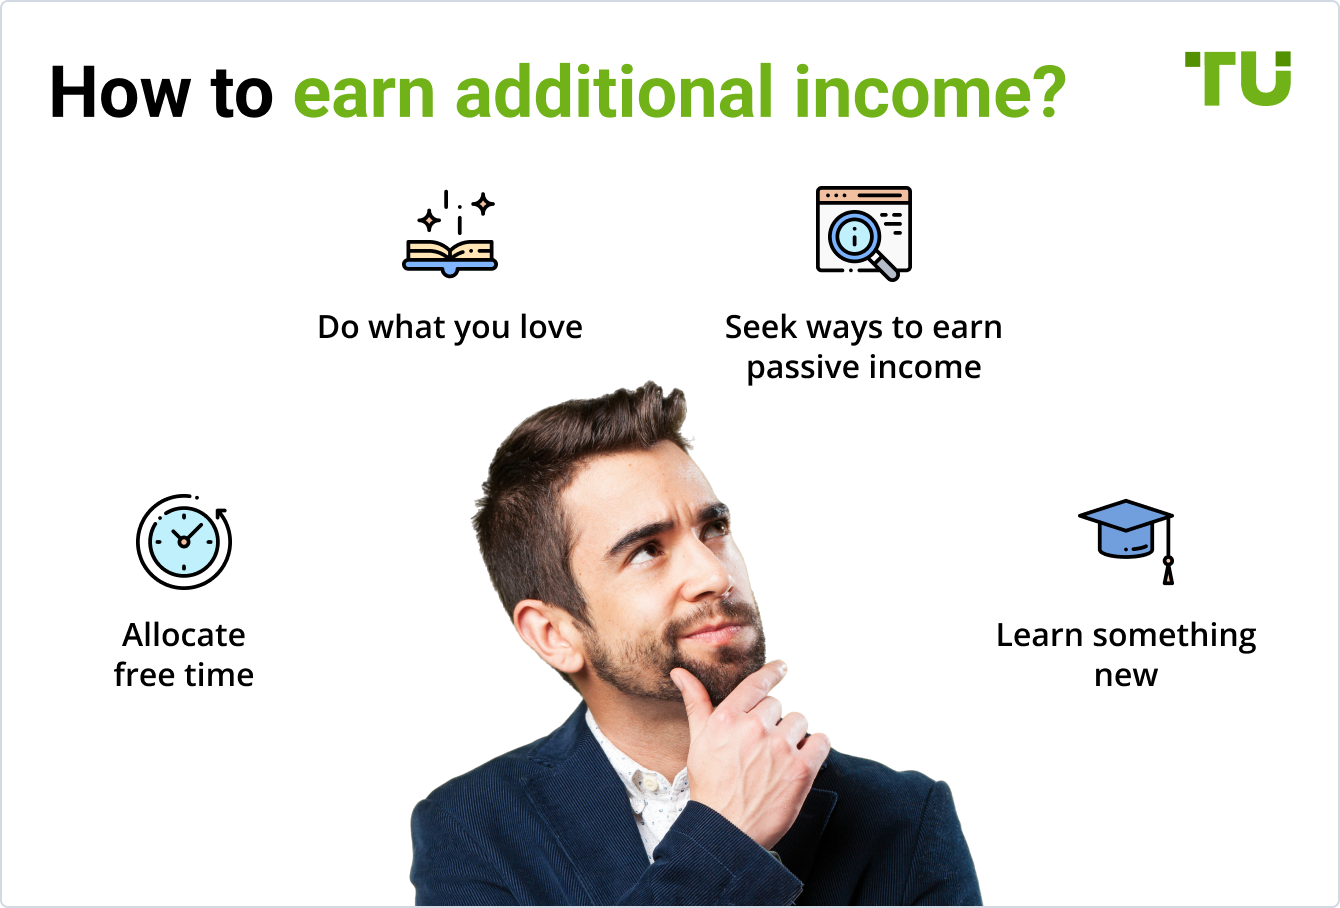 How to earn additional income?